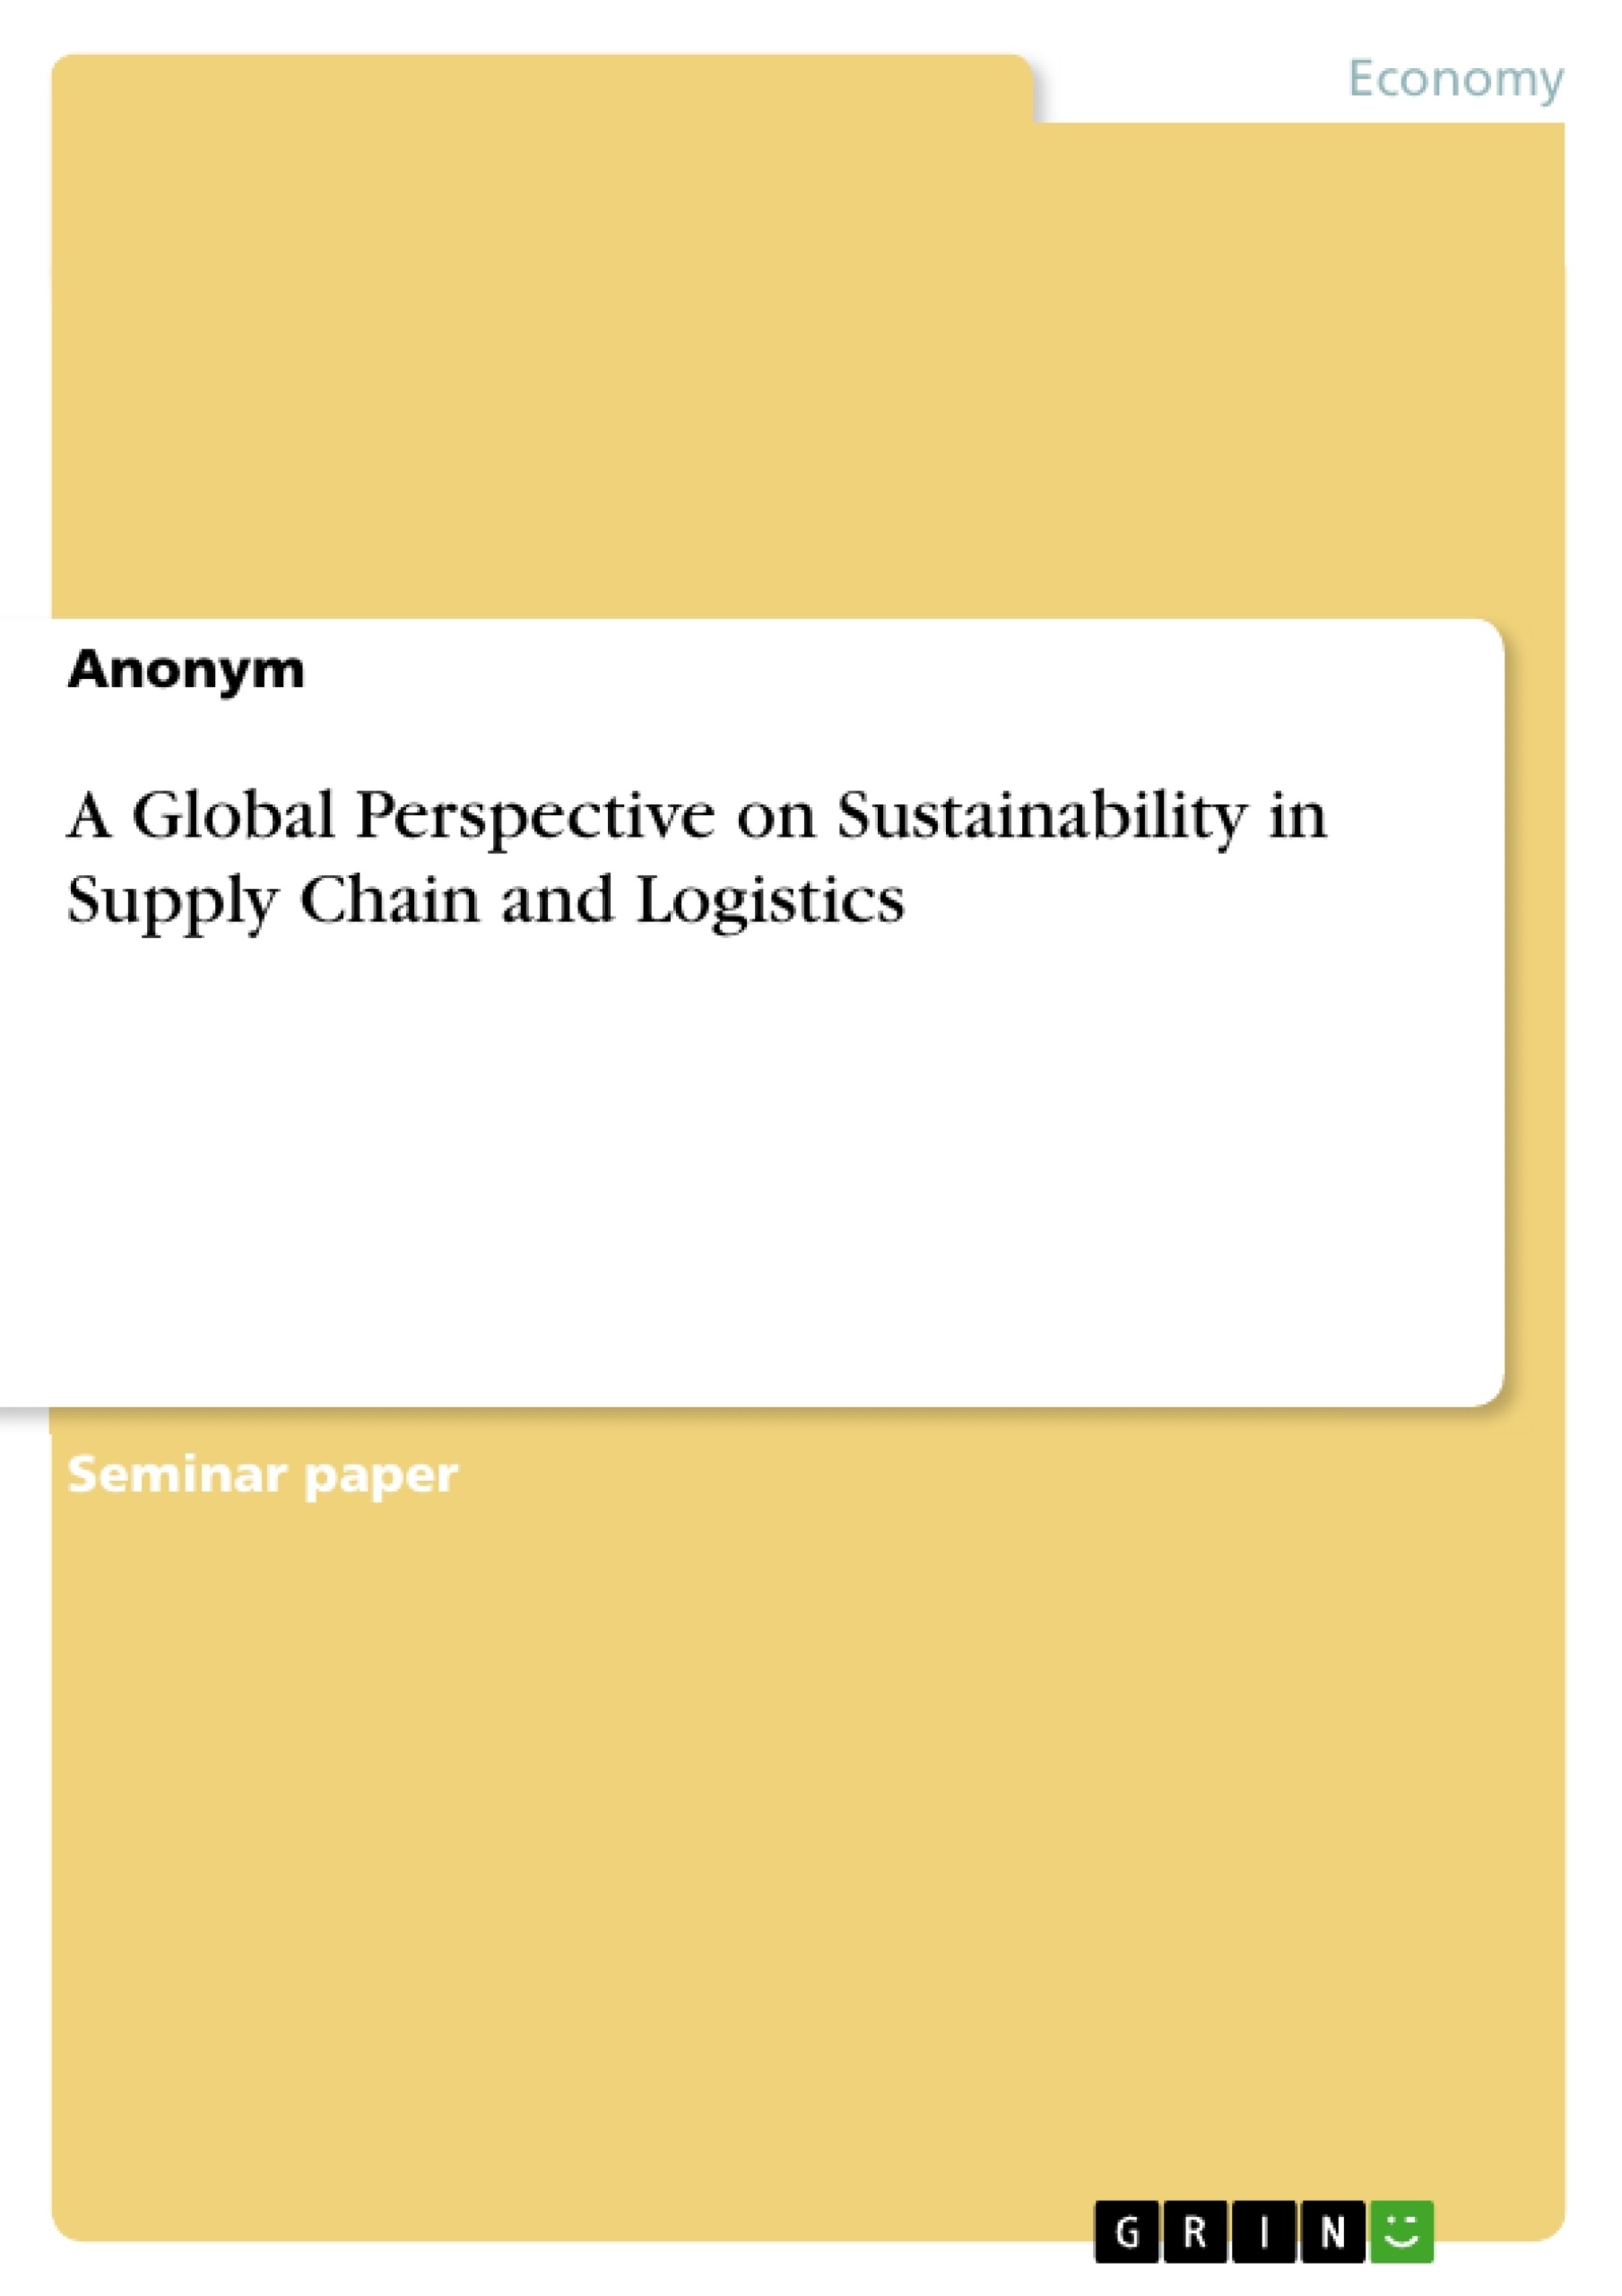 Title: A Global Perspective on Sustainability in Supply Chain and Logistics